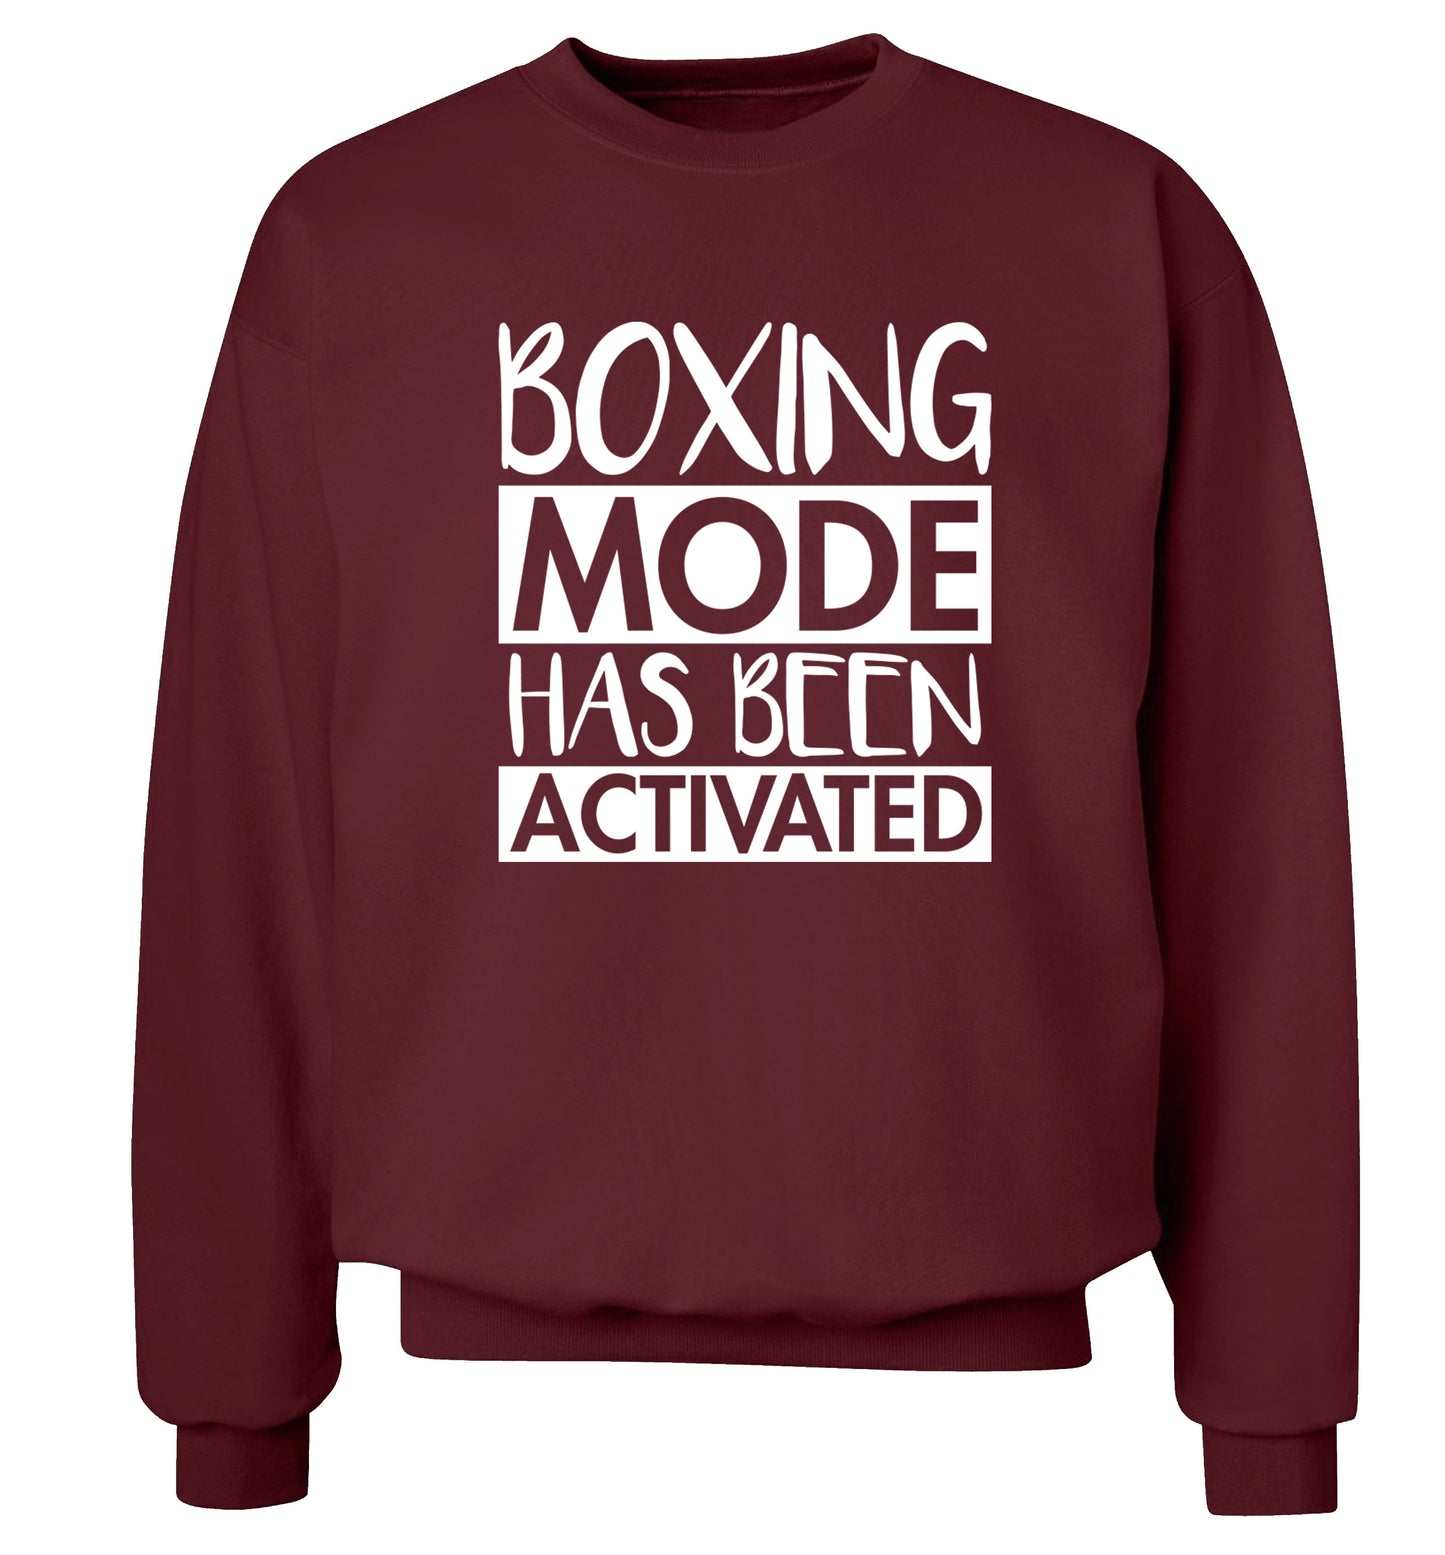 Boxing mode activated Adult's unisex maroon Sweater 2XL